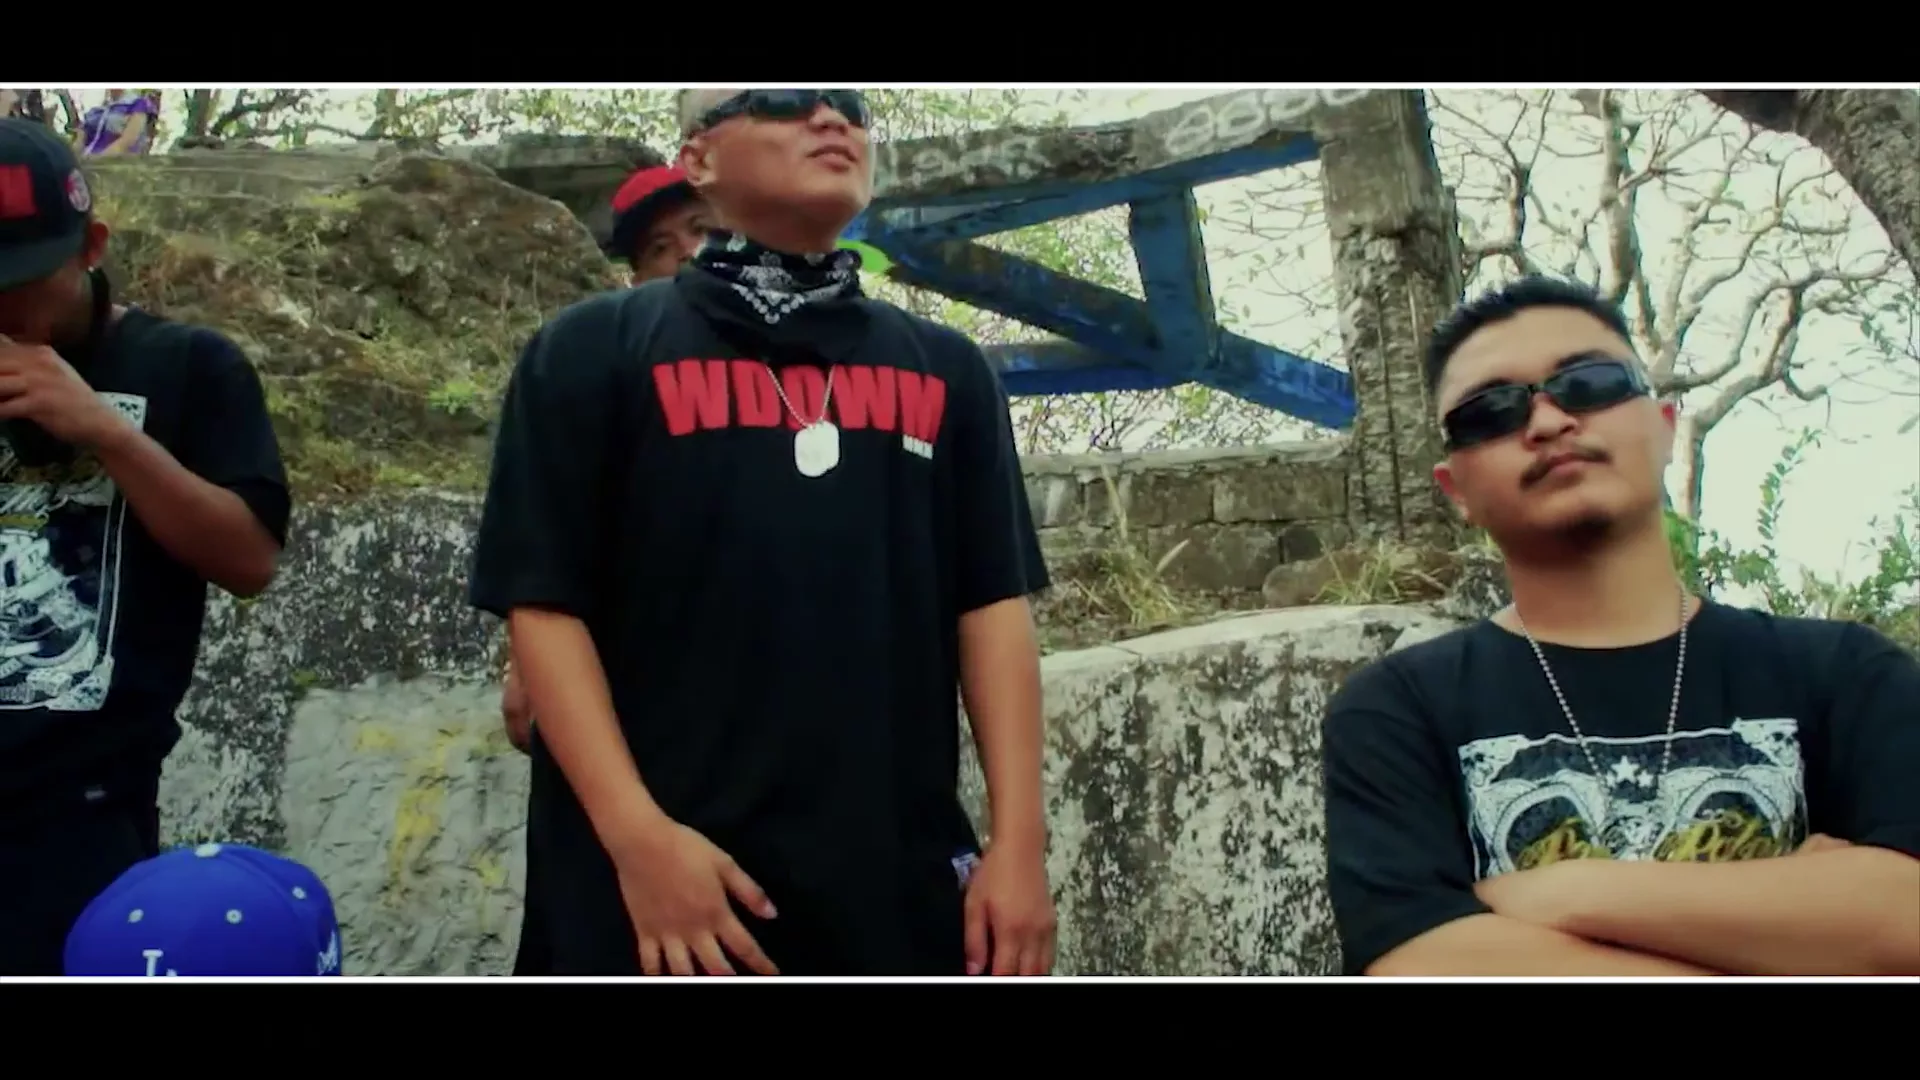 Paraiso Ng Pamorma - Sparo Esse & Abaddon Ft. Tuglaks (Official Music Video)